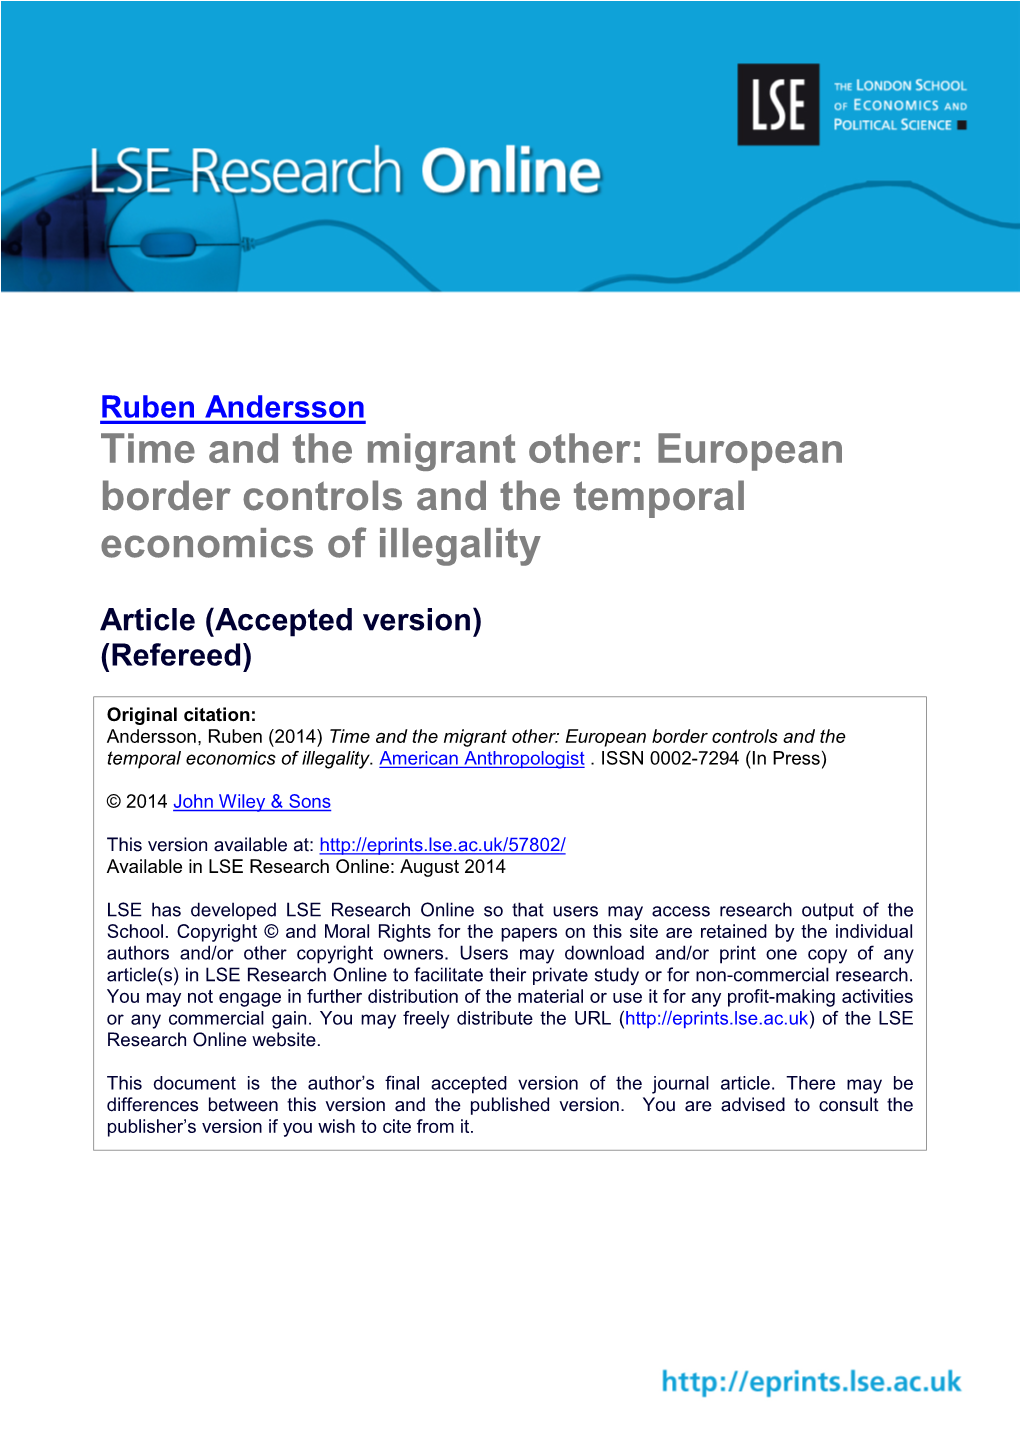 Time and the Migrant Other: European Border Controls and the Temporal Economics of Illegality